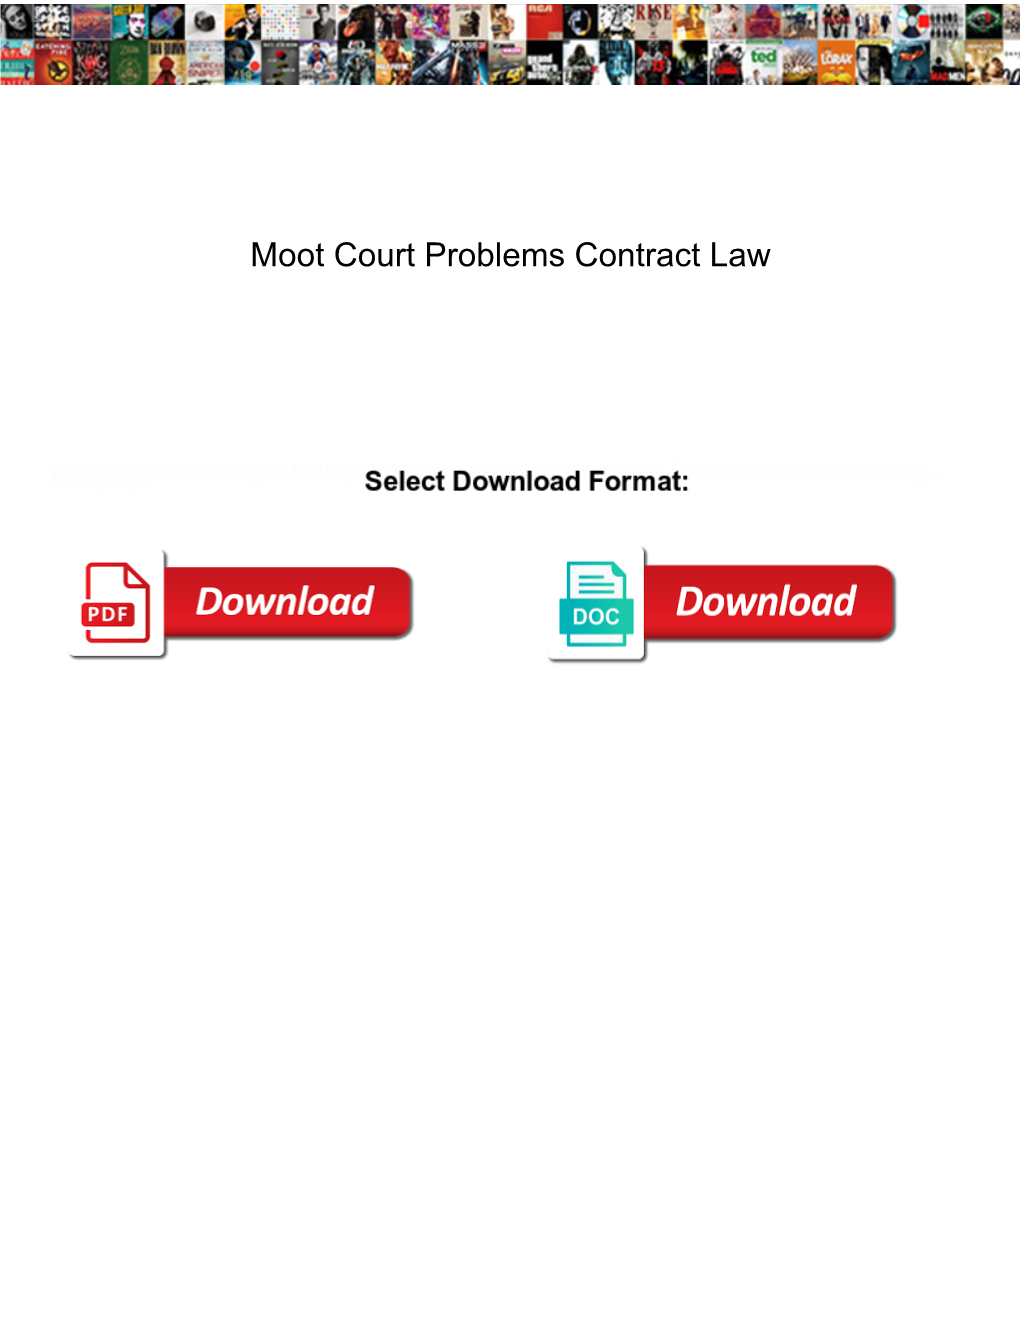 Moot Court Problems Contract Law